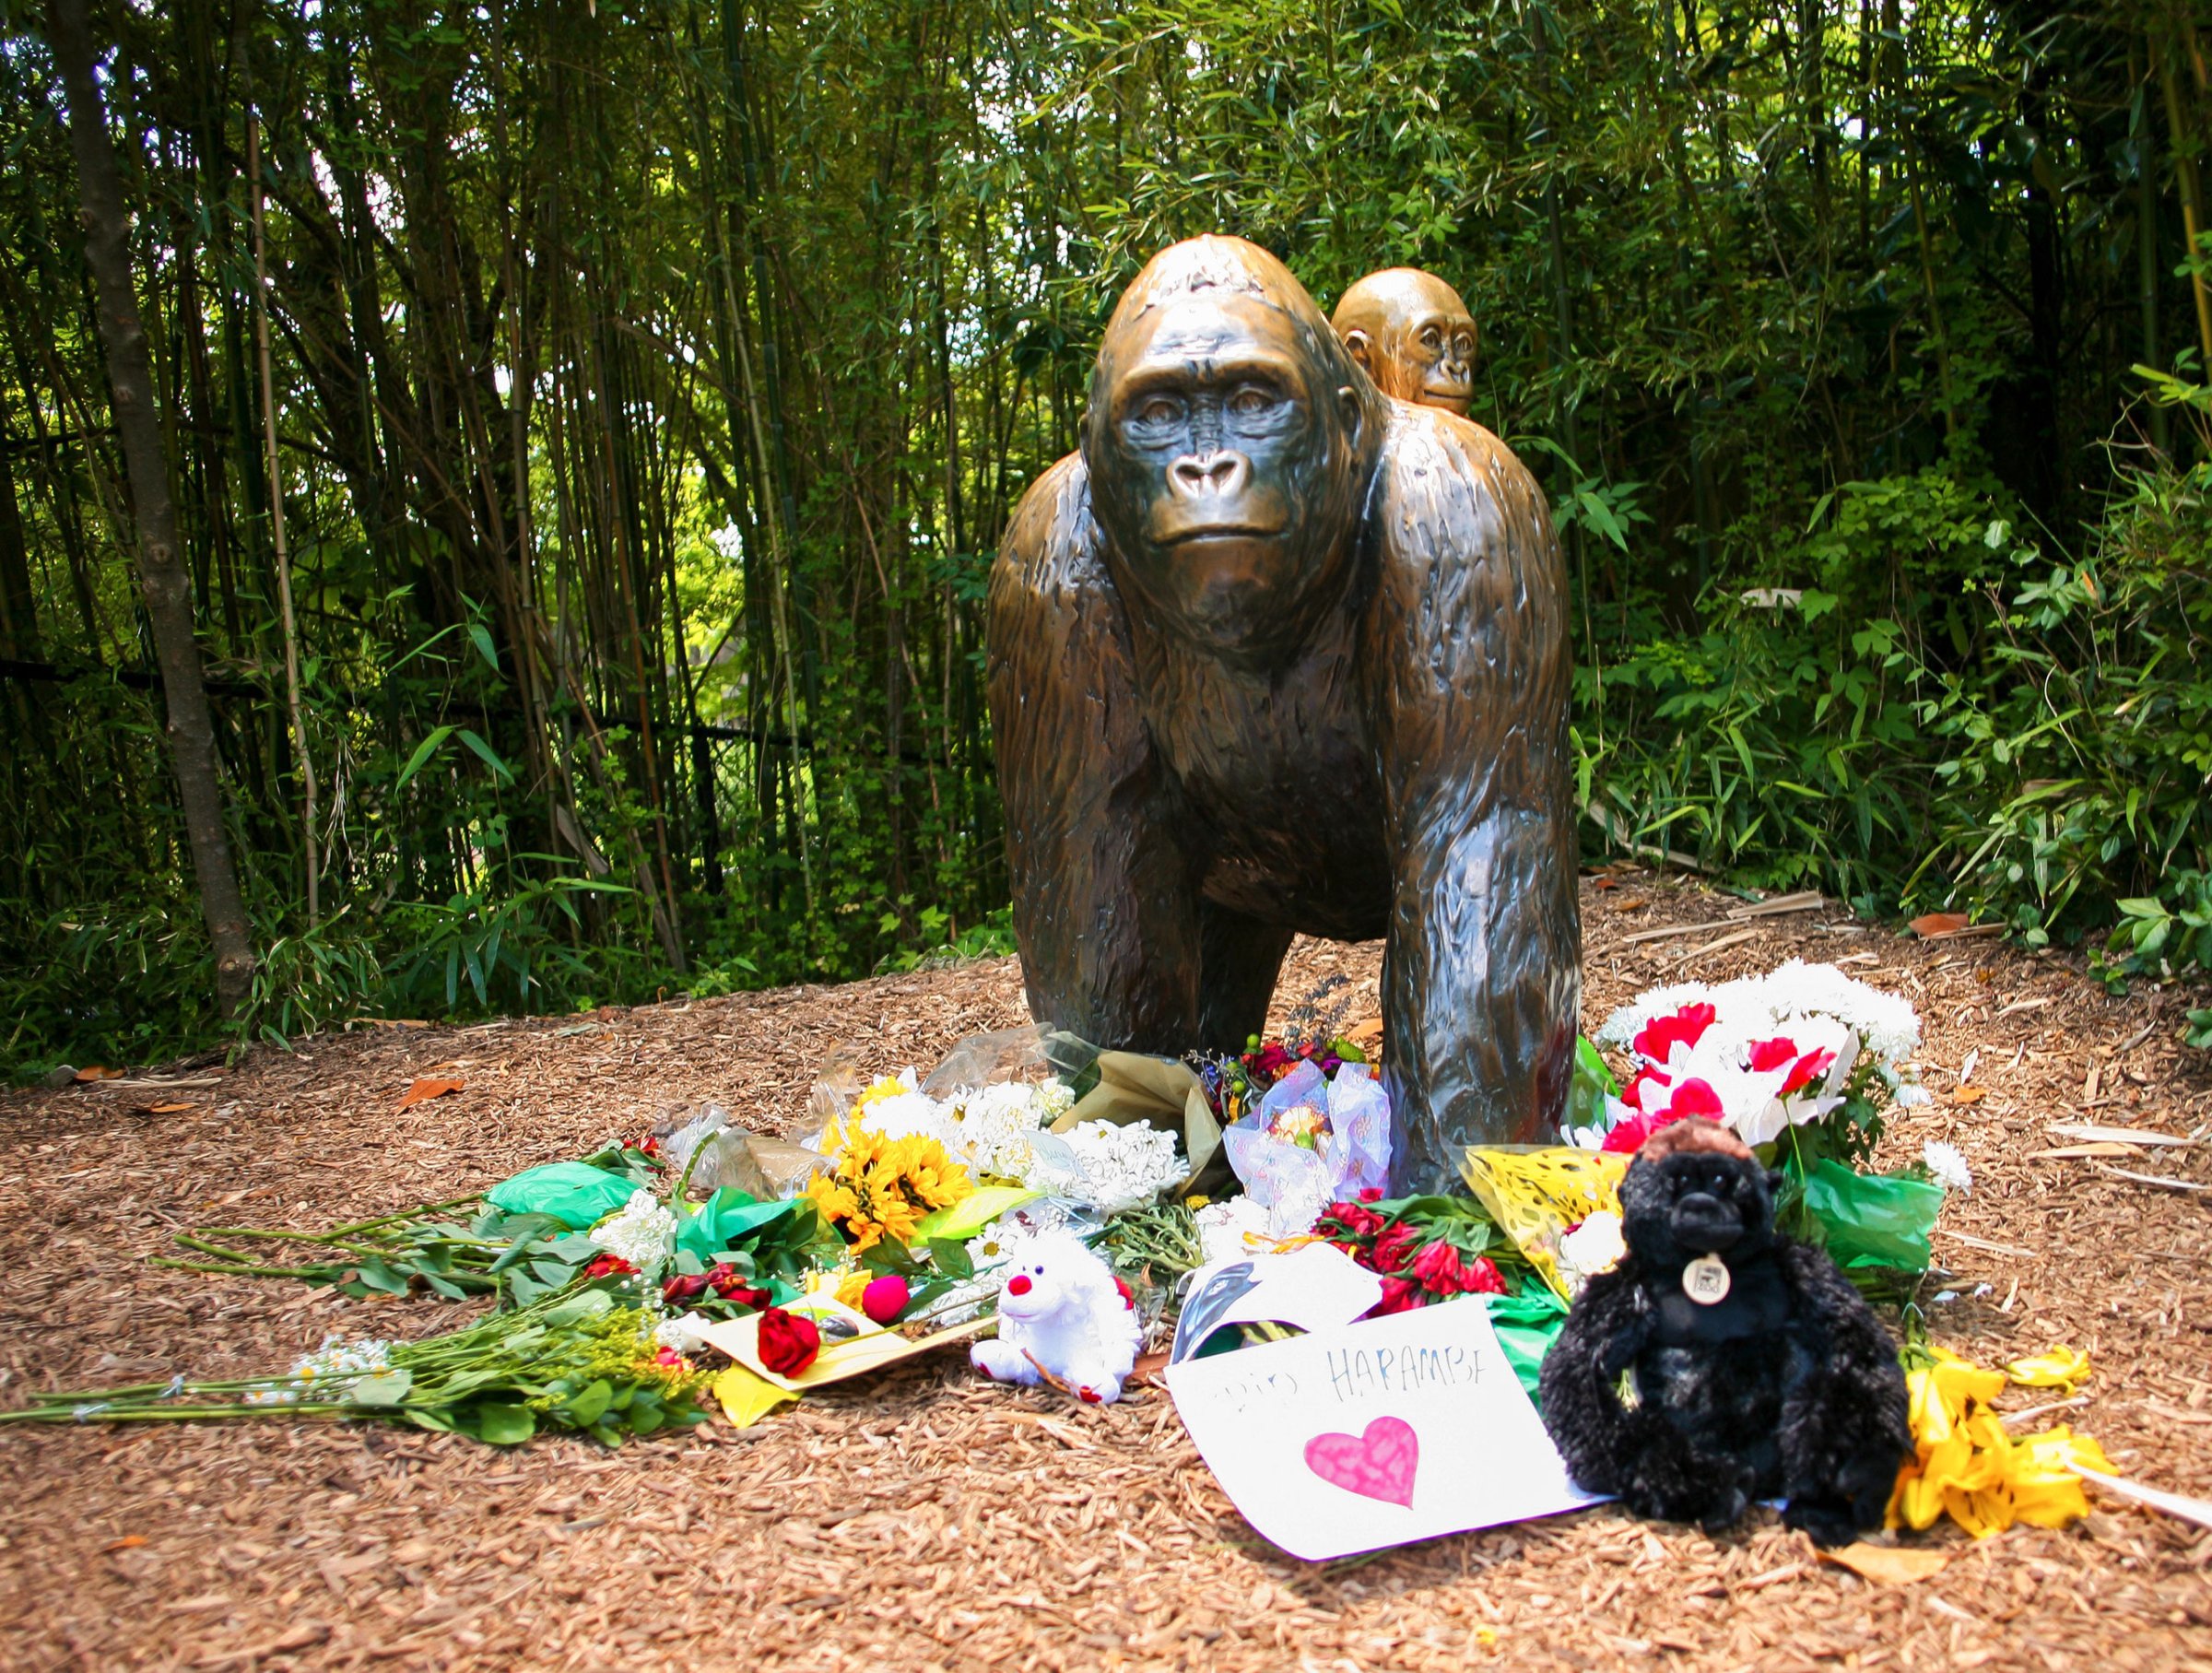 Flowers were laid in an impromptu memorial to the gorilla Harambe at the Cincinnati Zoo